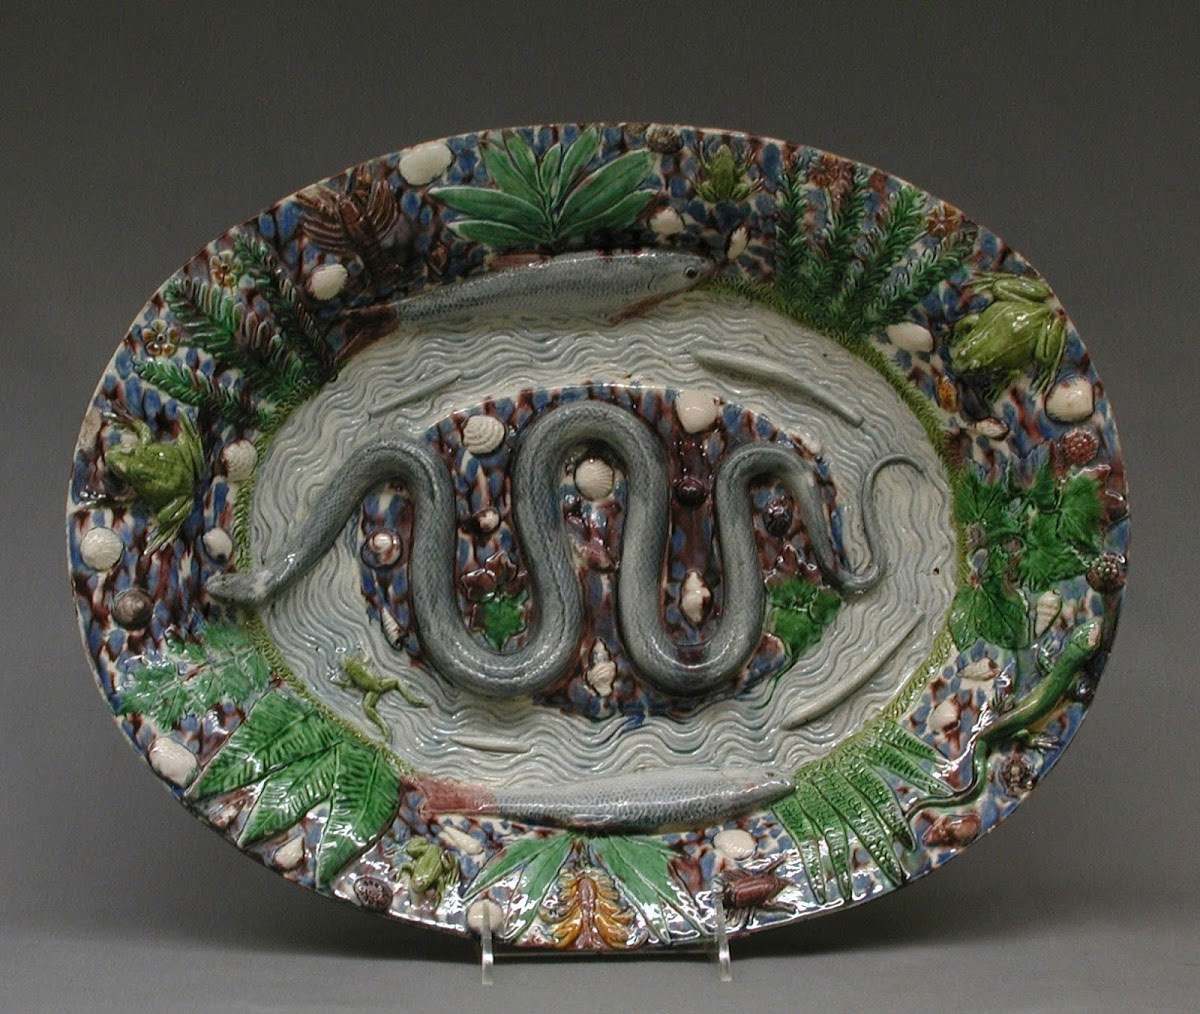 Ceramic plate with a snake in the centre and foliage around the border